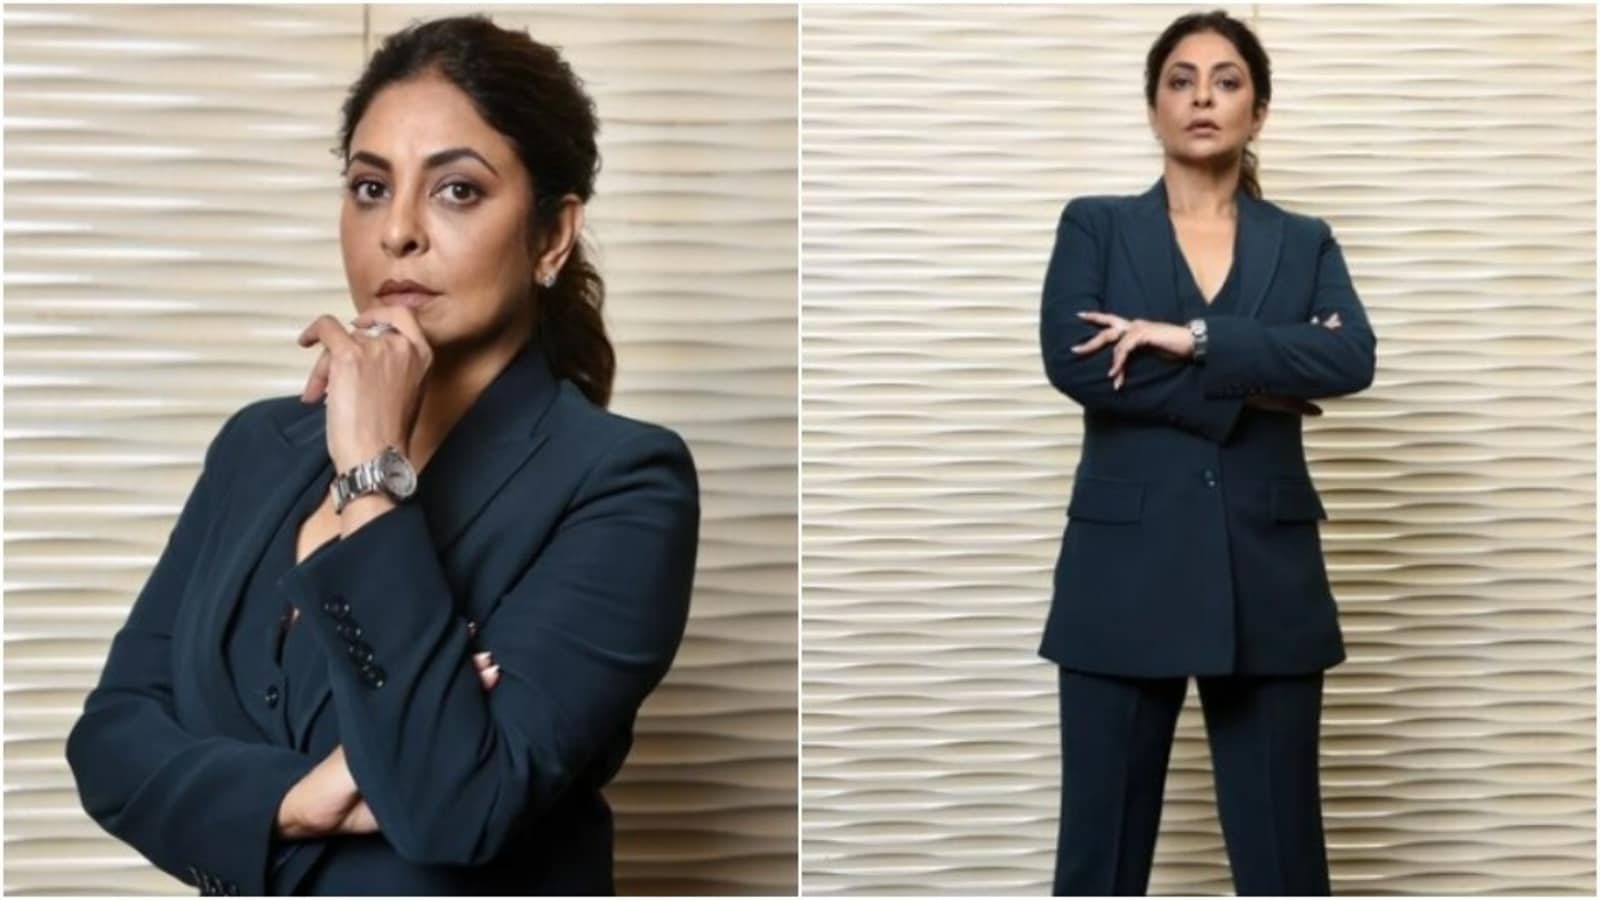 Shefali Shah, in a black pantsuit, is giving ultimate boss lady vibes